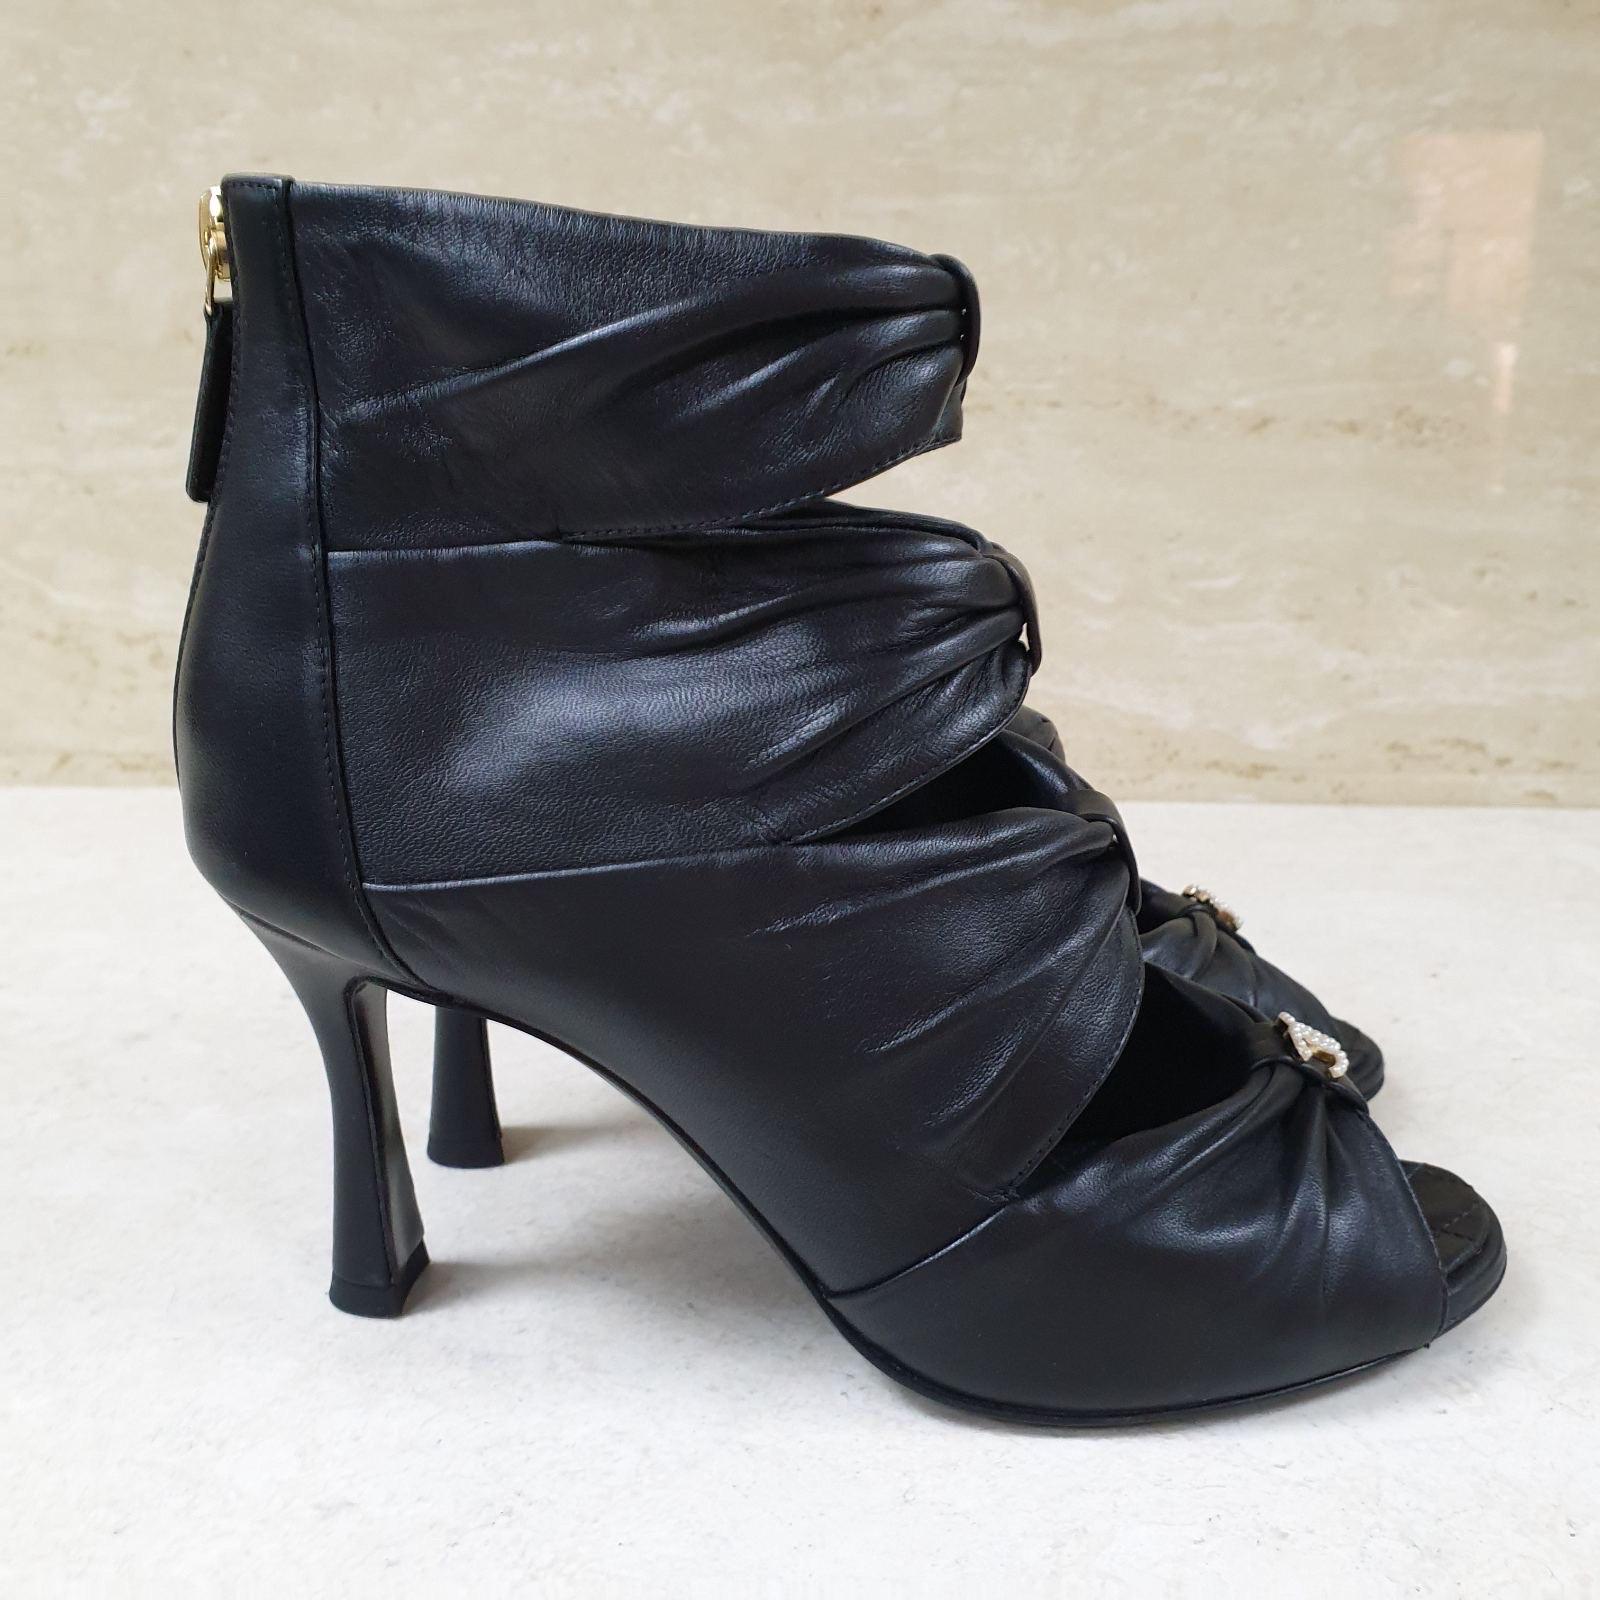 Chanel Black Leather Open Toe Bow CC Boots Booties Heels 1